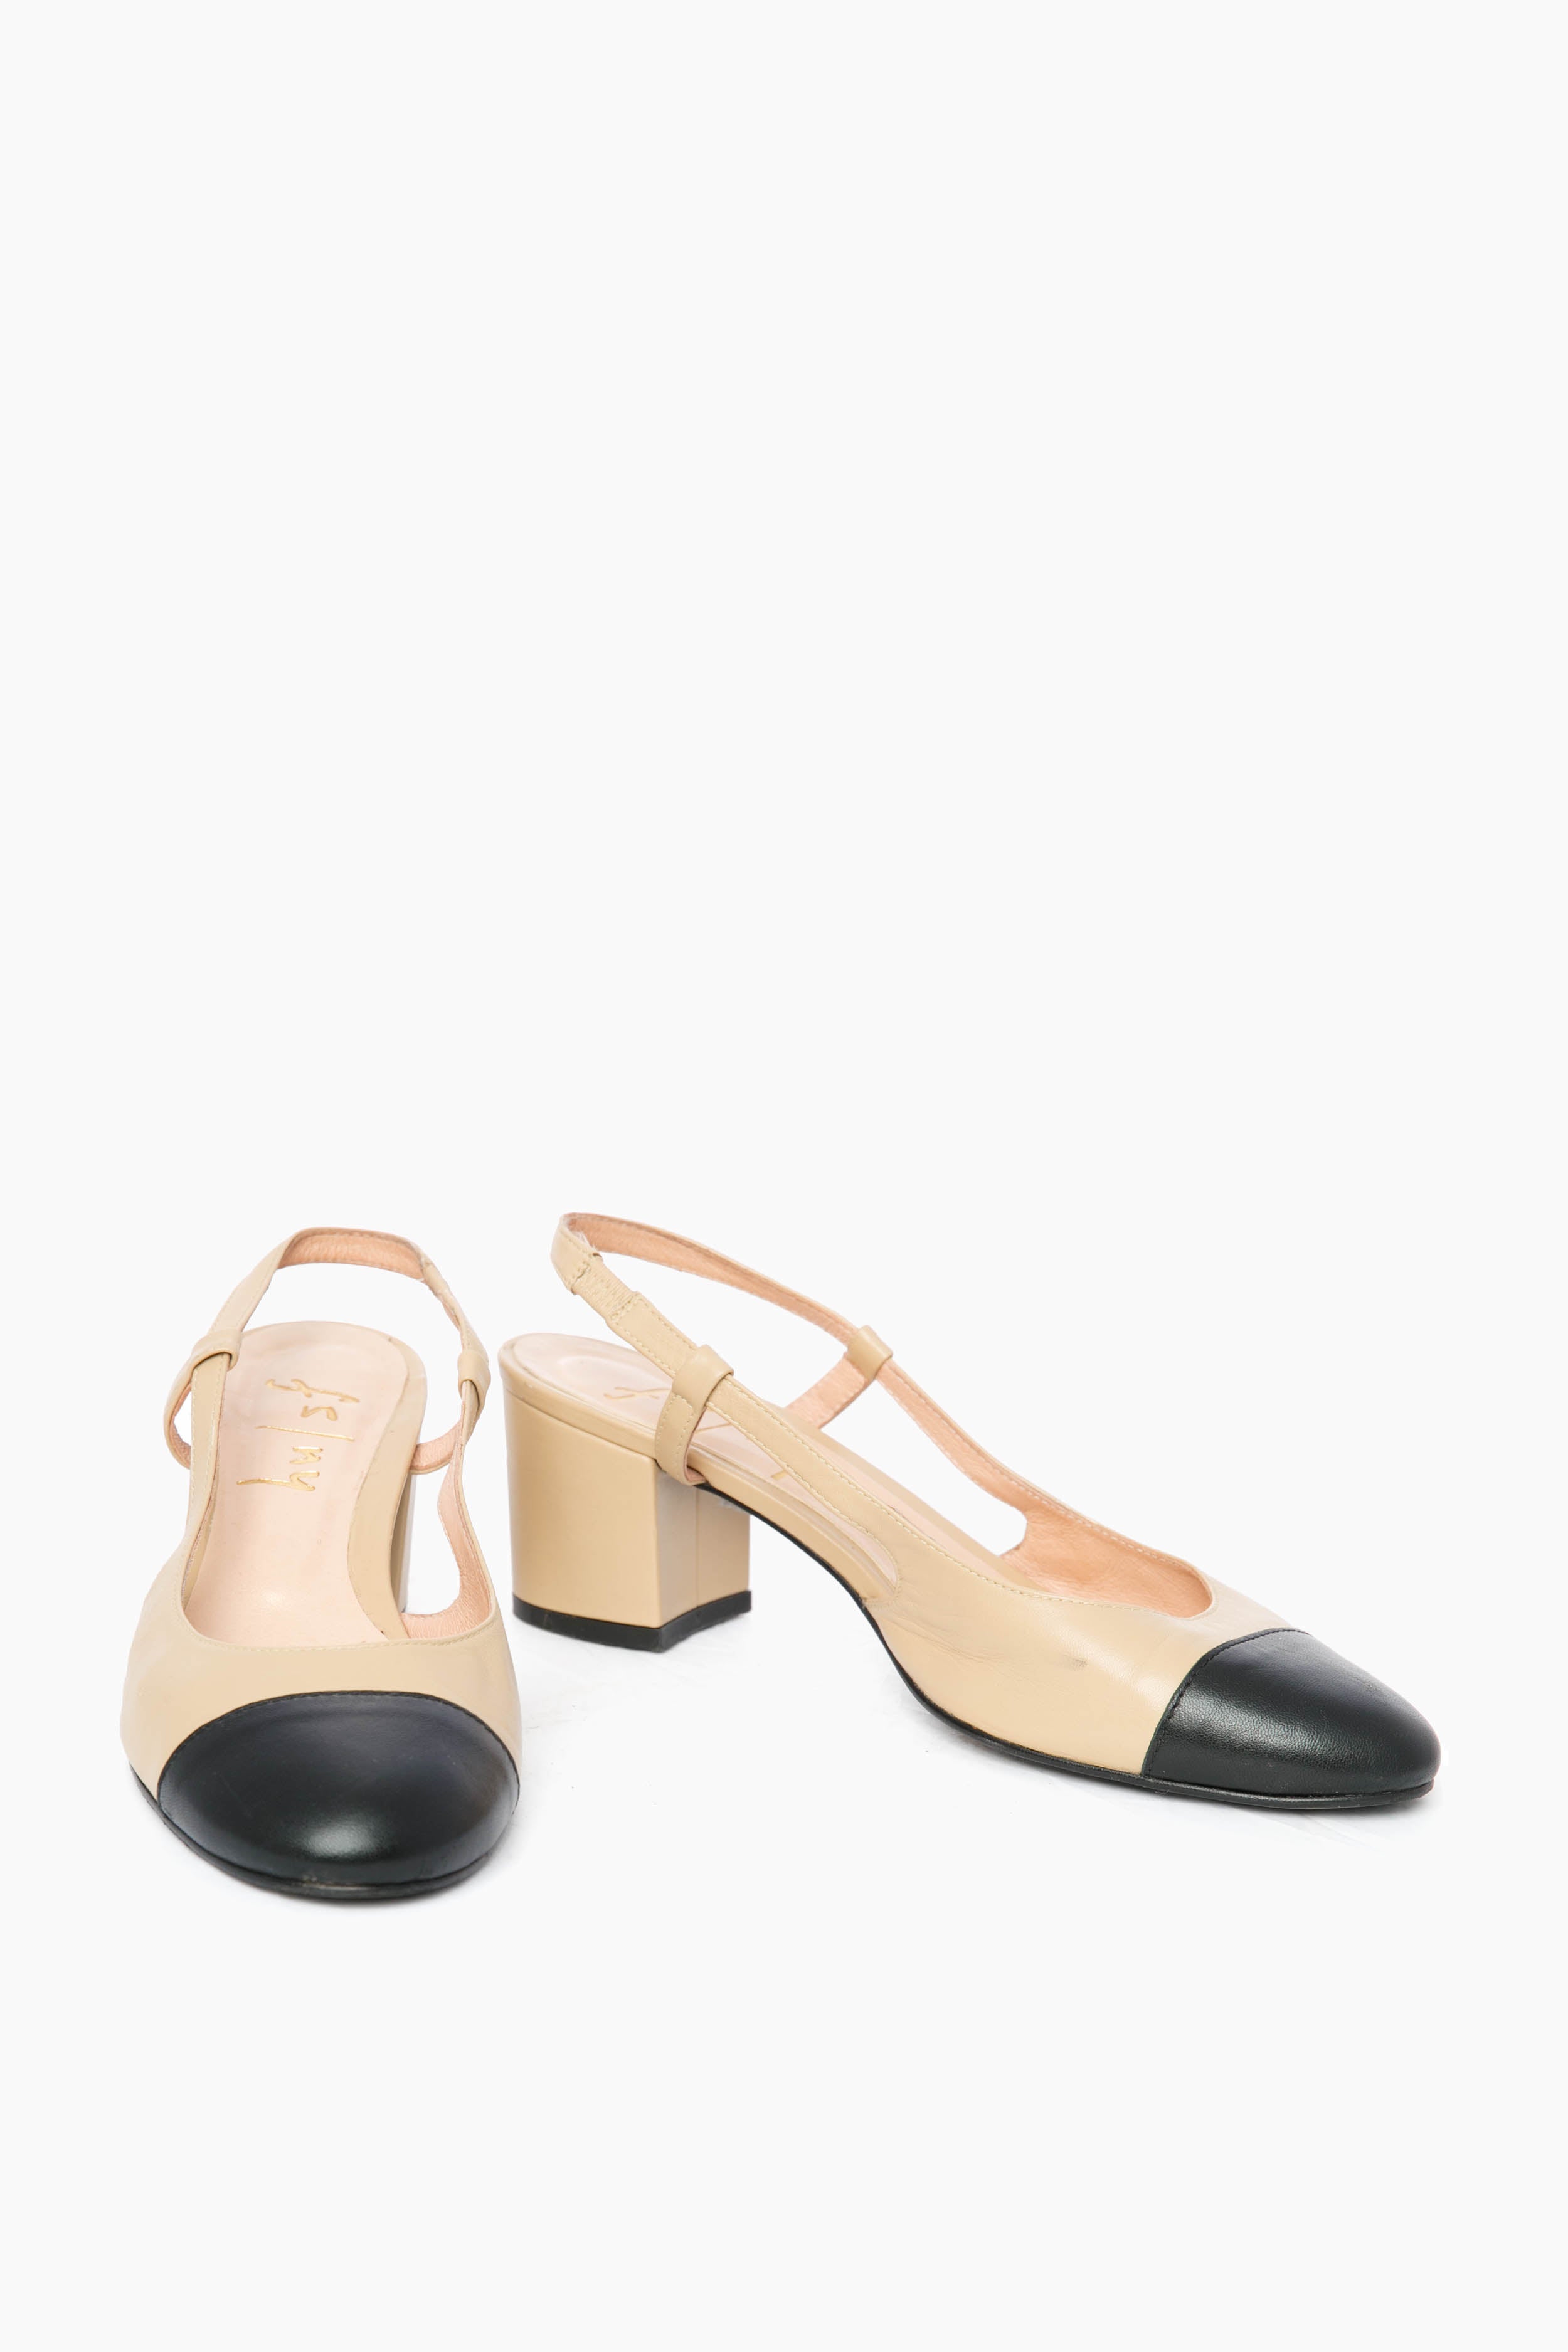 chanel cap toe dupe